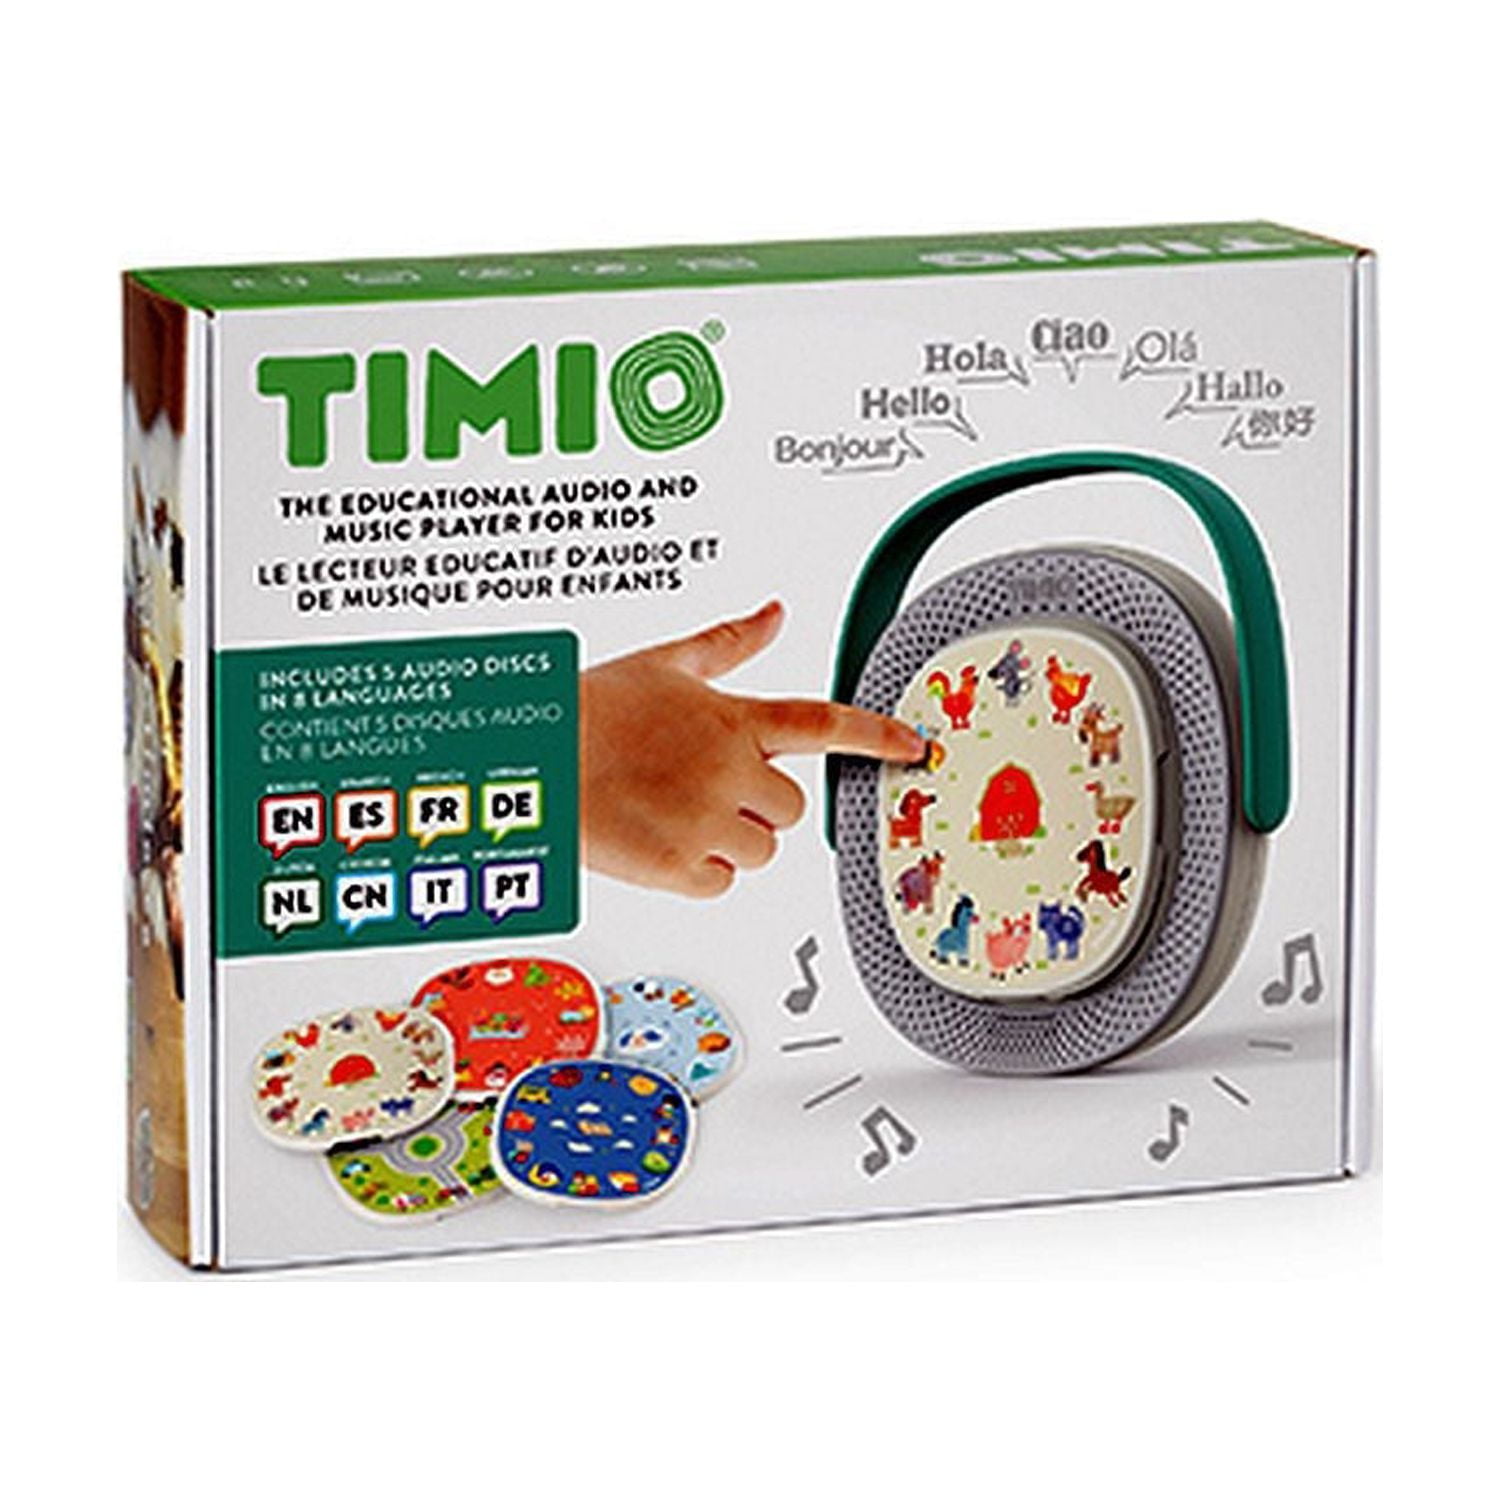 TIMIO, The Interactive Audio Learning Toy (timio_co) - Profile